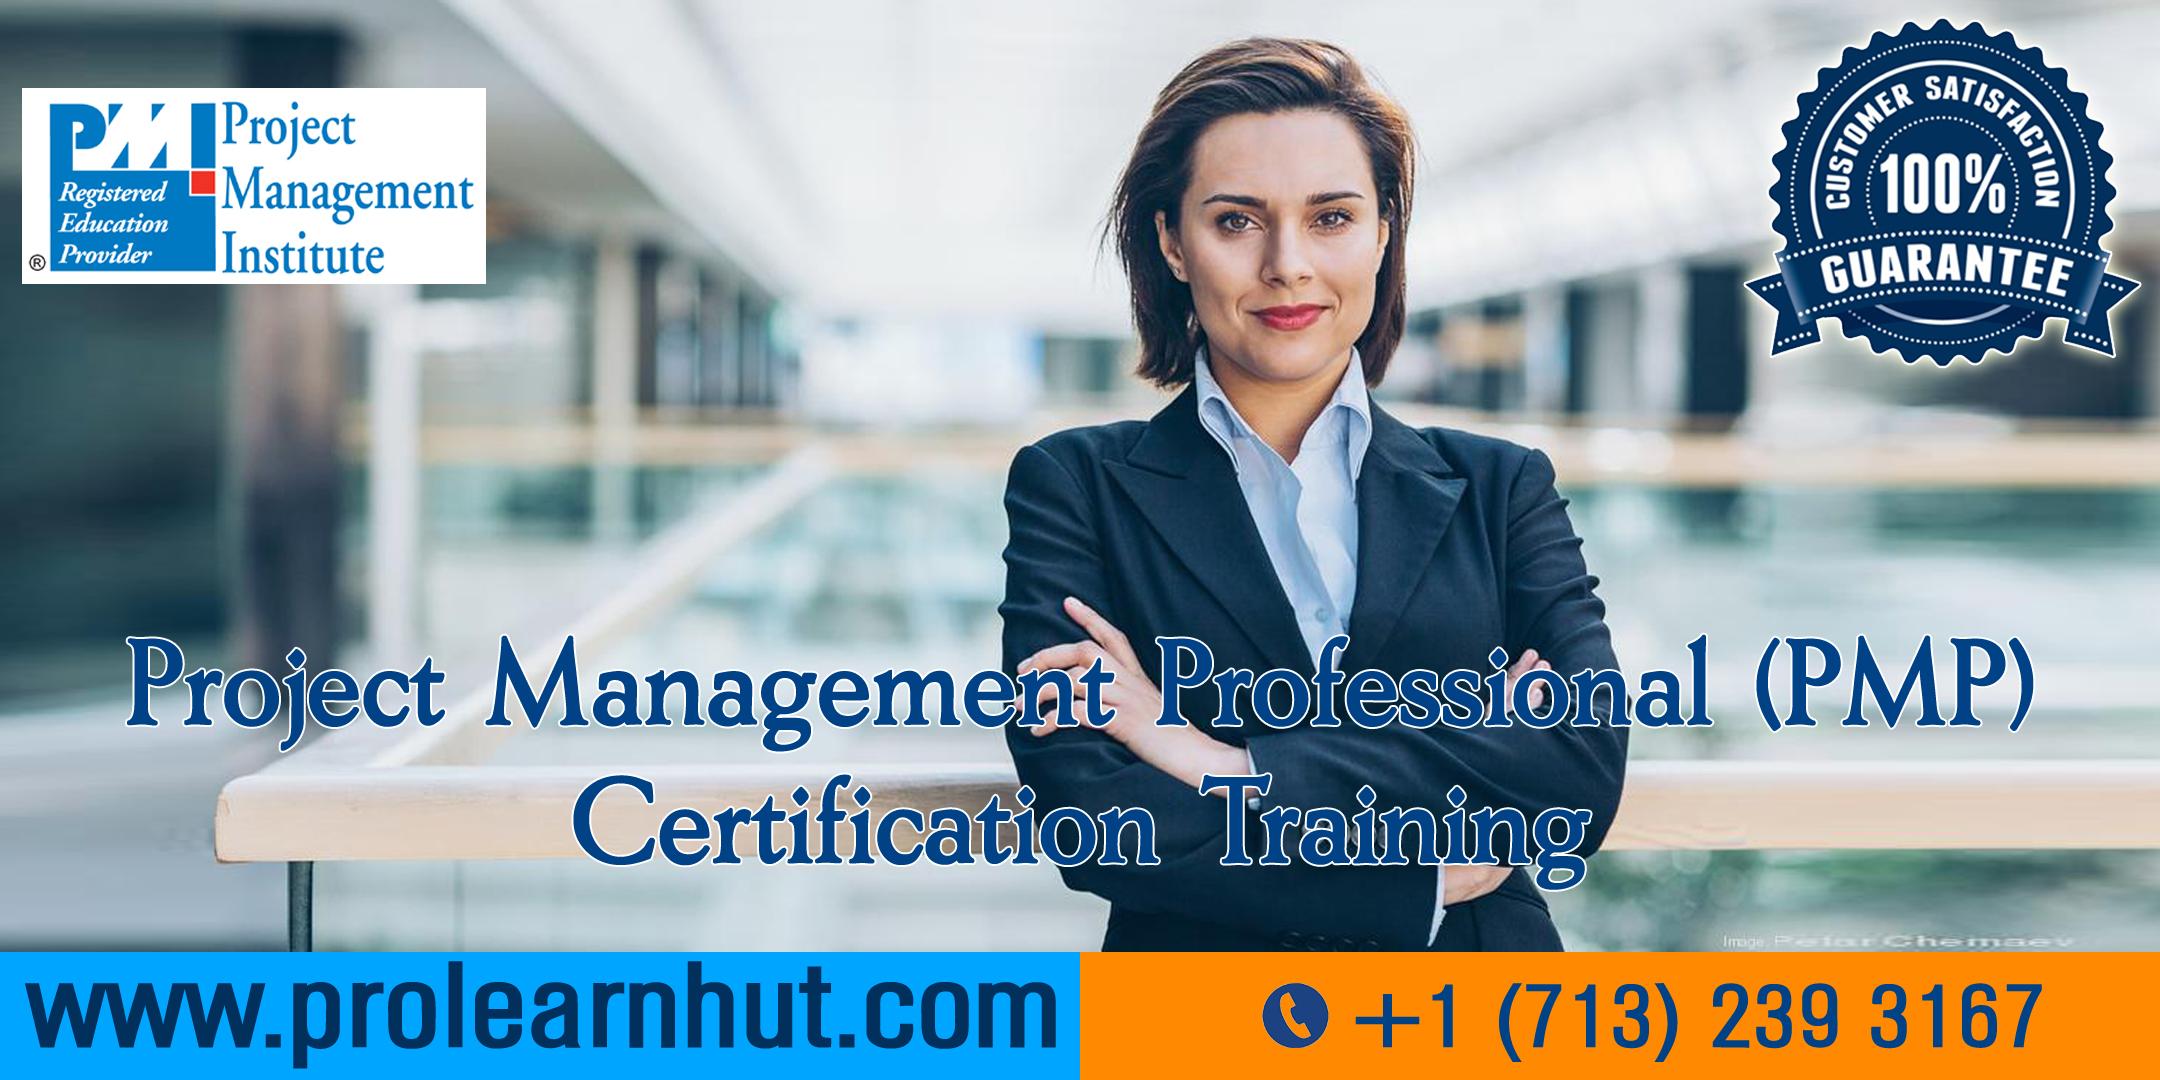 PMP Certification | Project Management Certification| PMP Training in Garland, TX | ProLearnHut